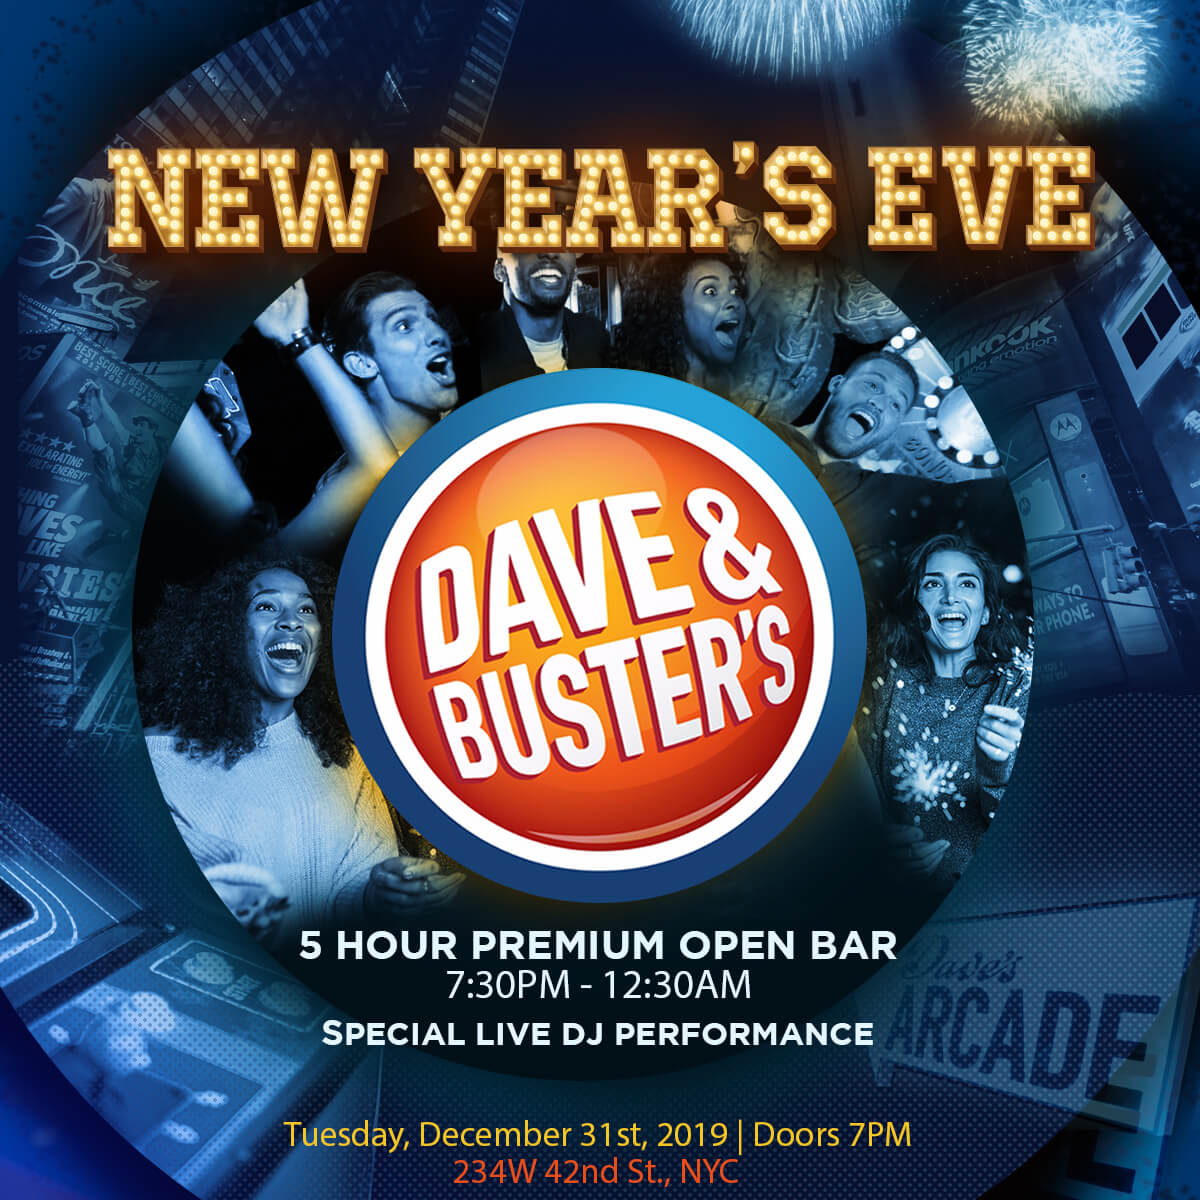 Dave & Buster's New Years Events